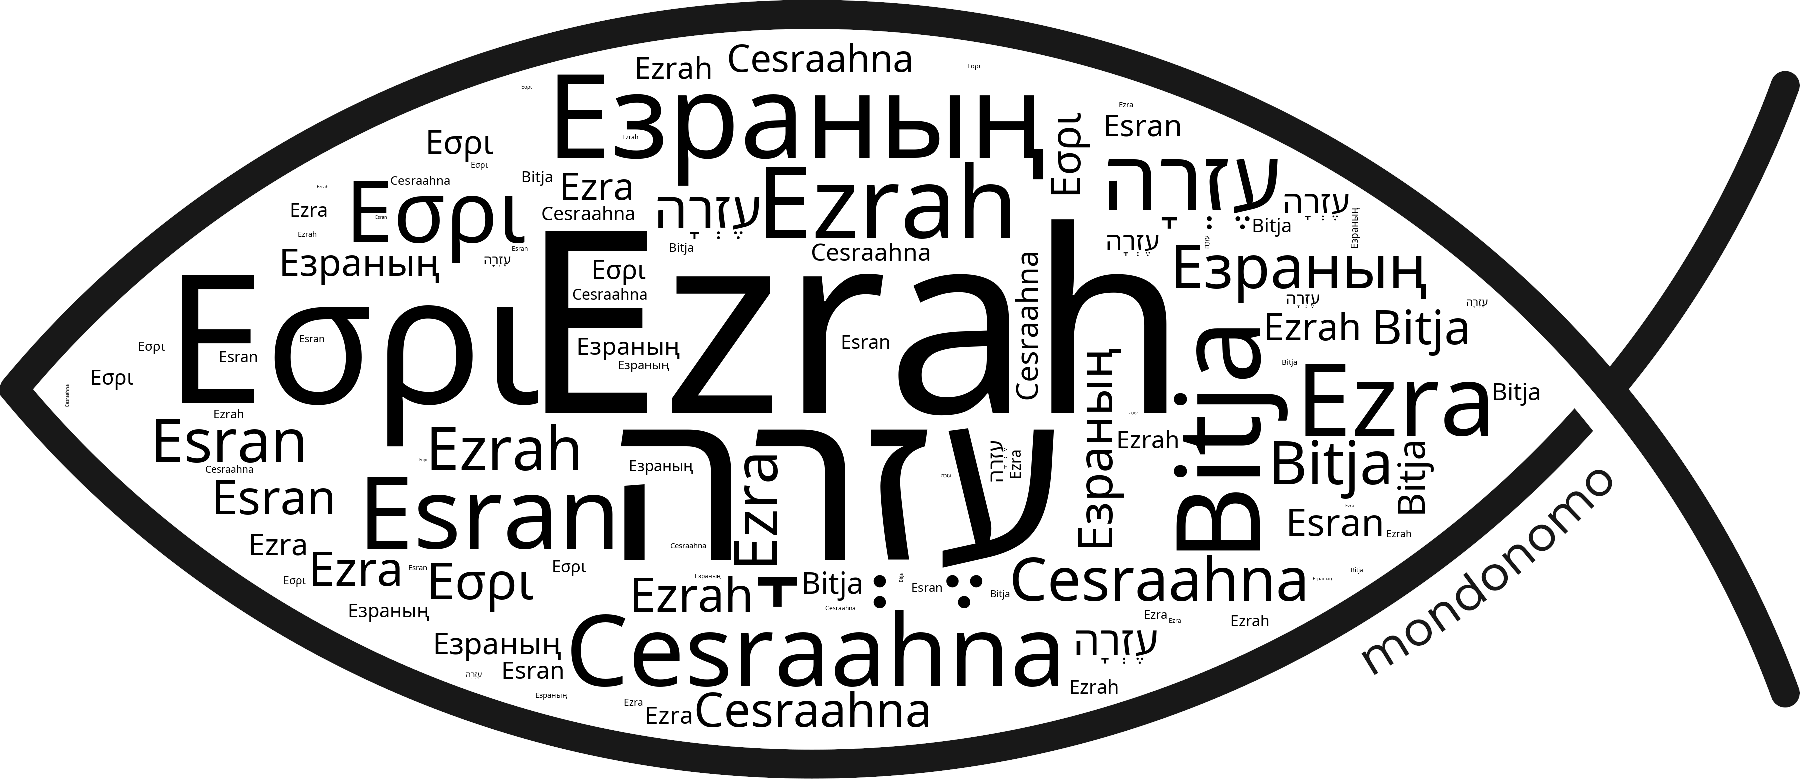 Name Ezrah in the world's Bibles